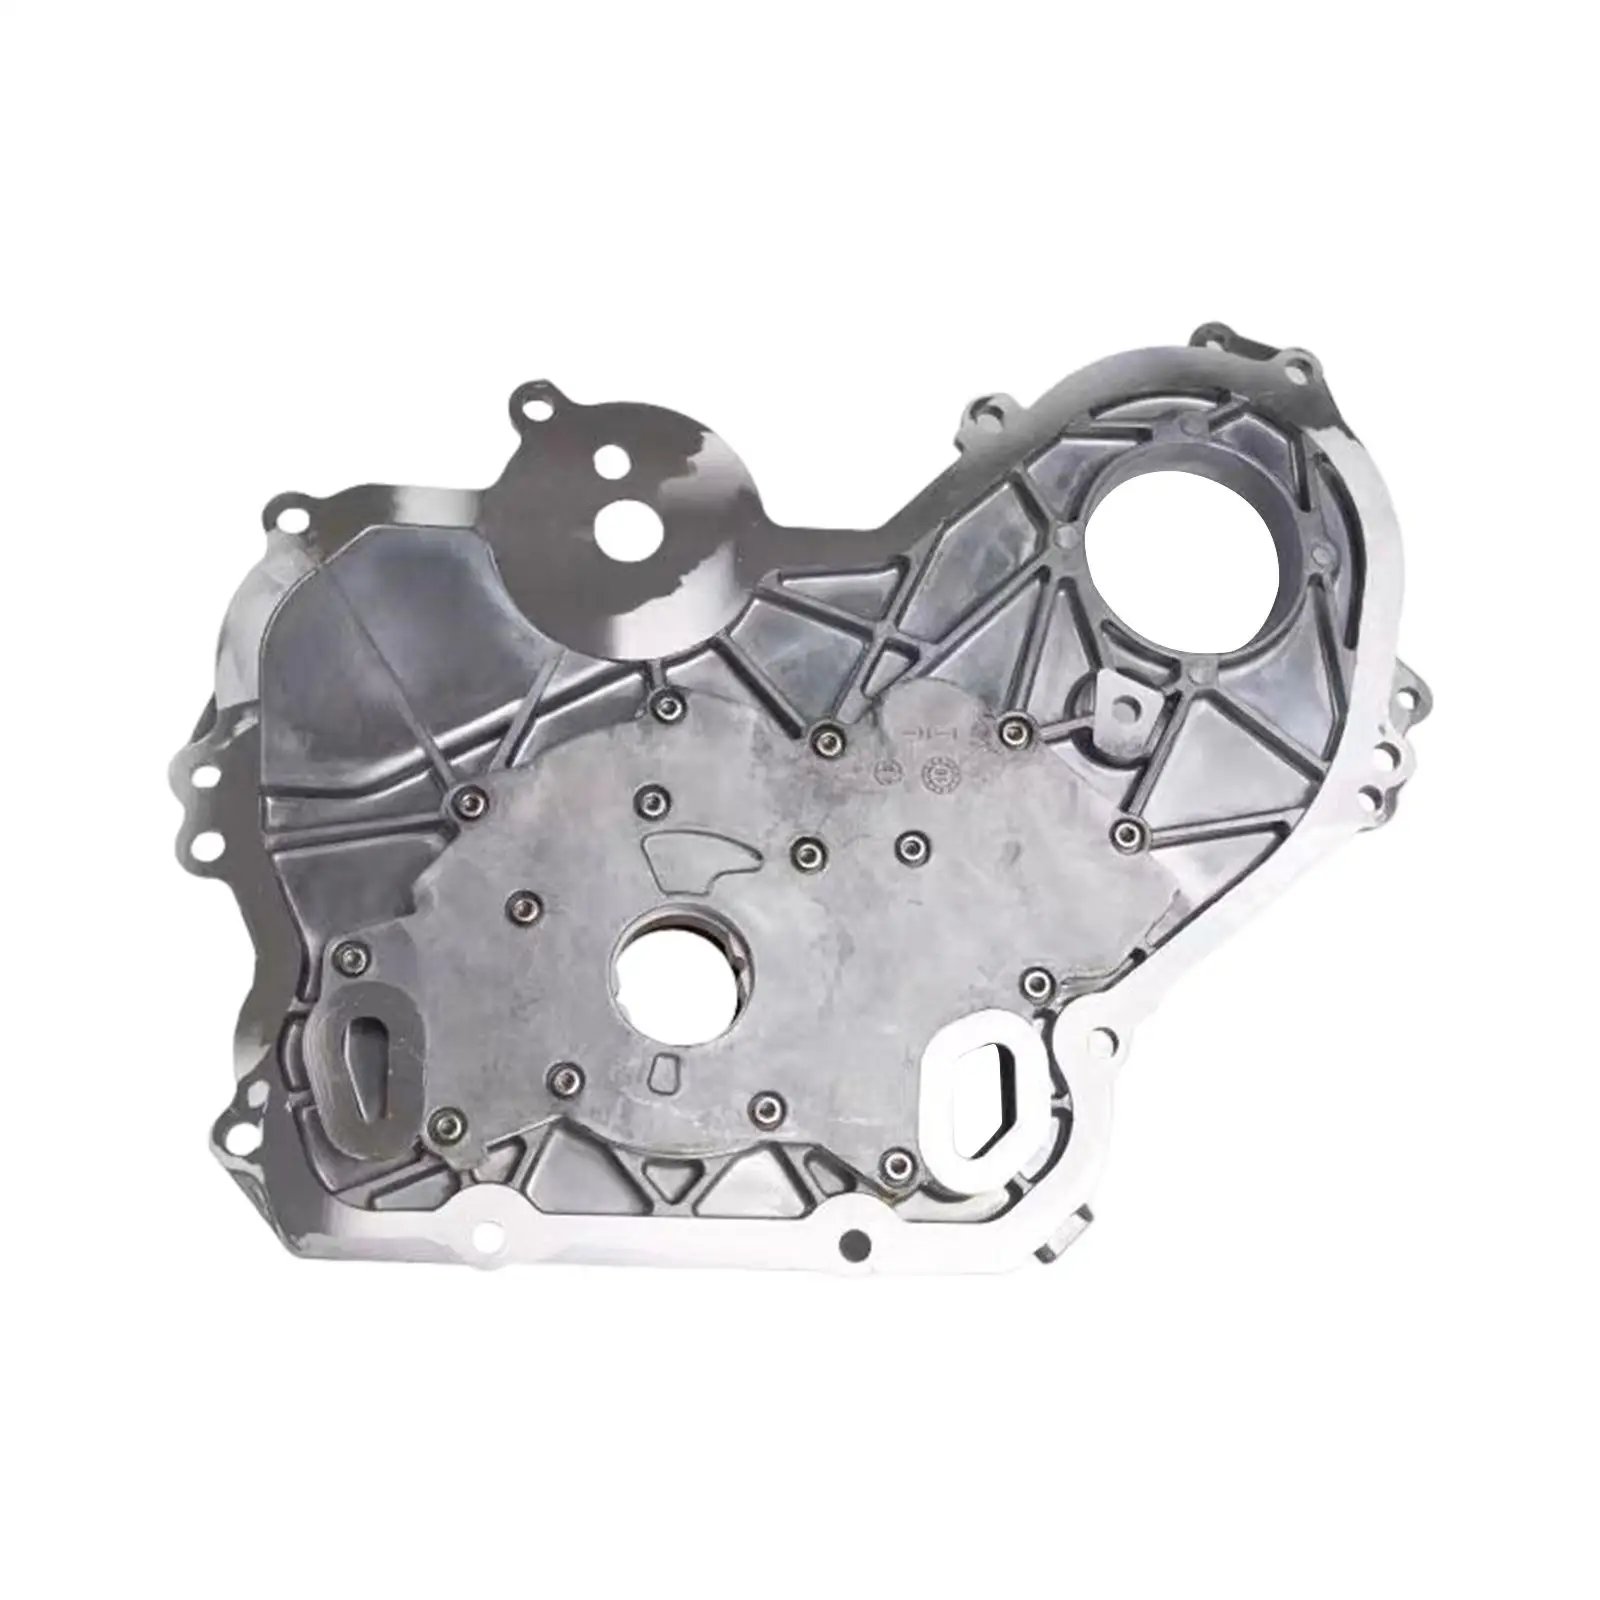 Engine Oil Pump Replacement 12584621 12637040 for Buick Regal Verano